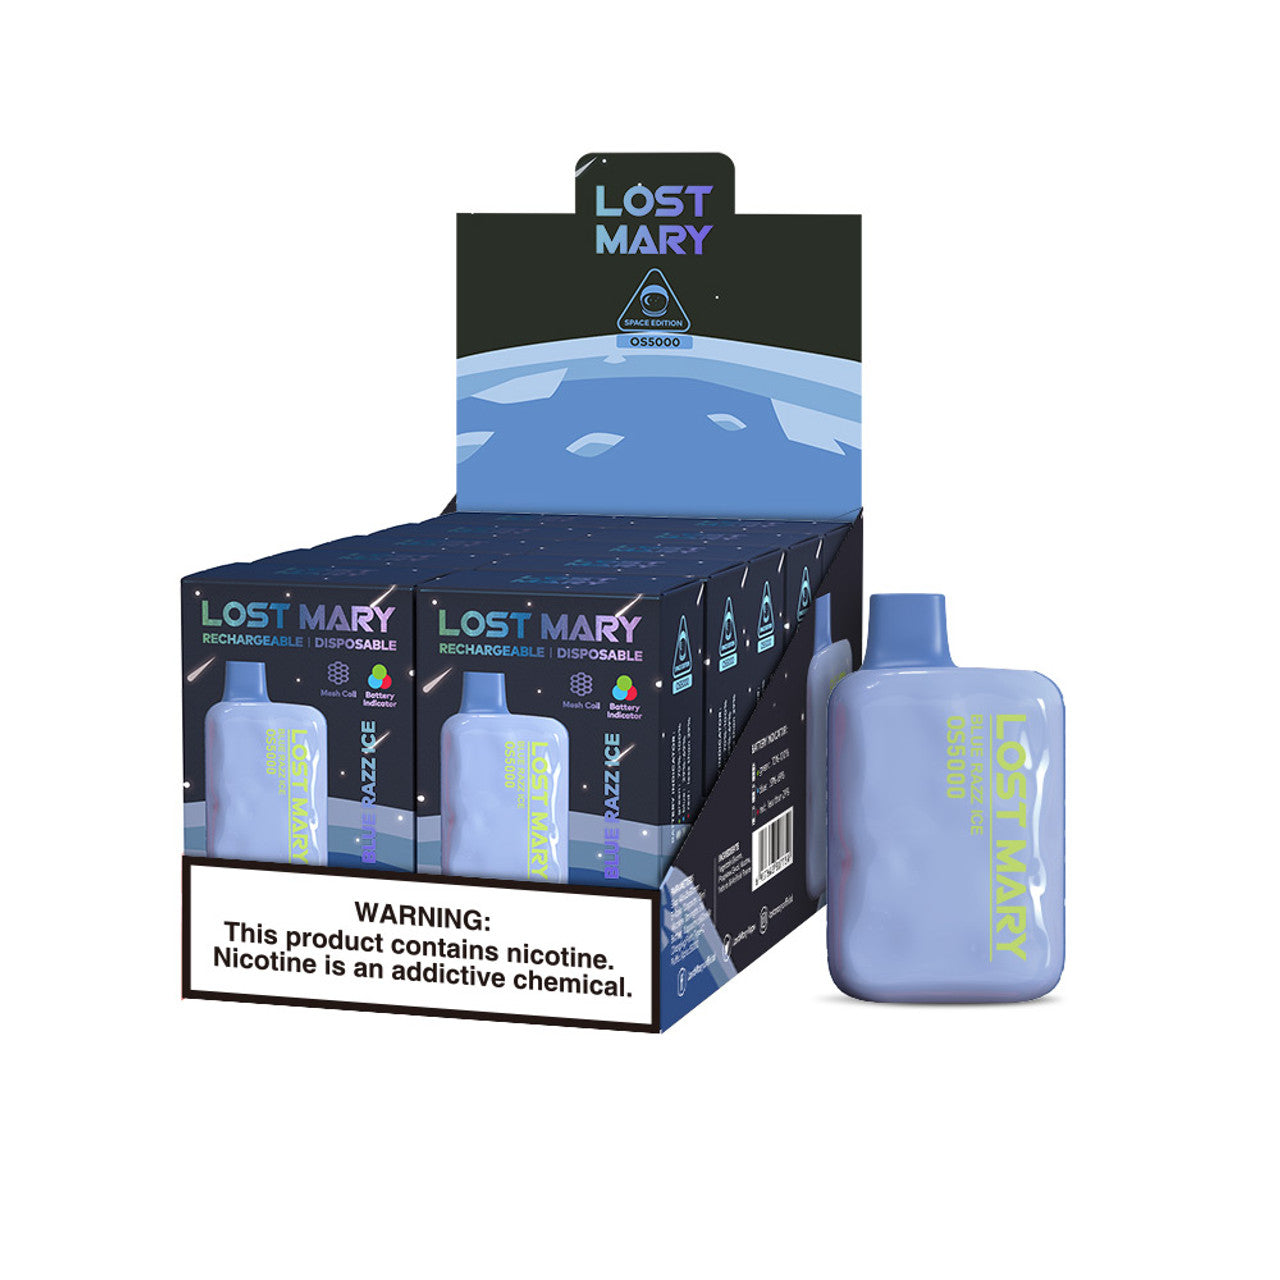 EB Lost Mary OS5000 Puffs Rechargeable Disposable Kit Vape Wholesale - 1 Box / 10pcs